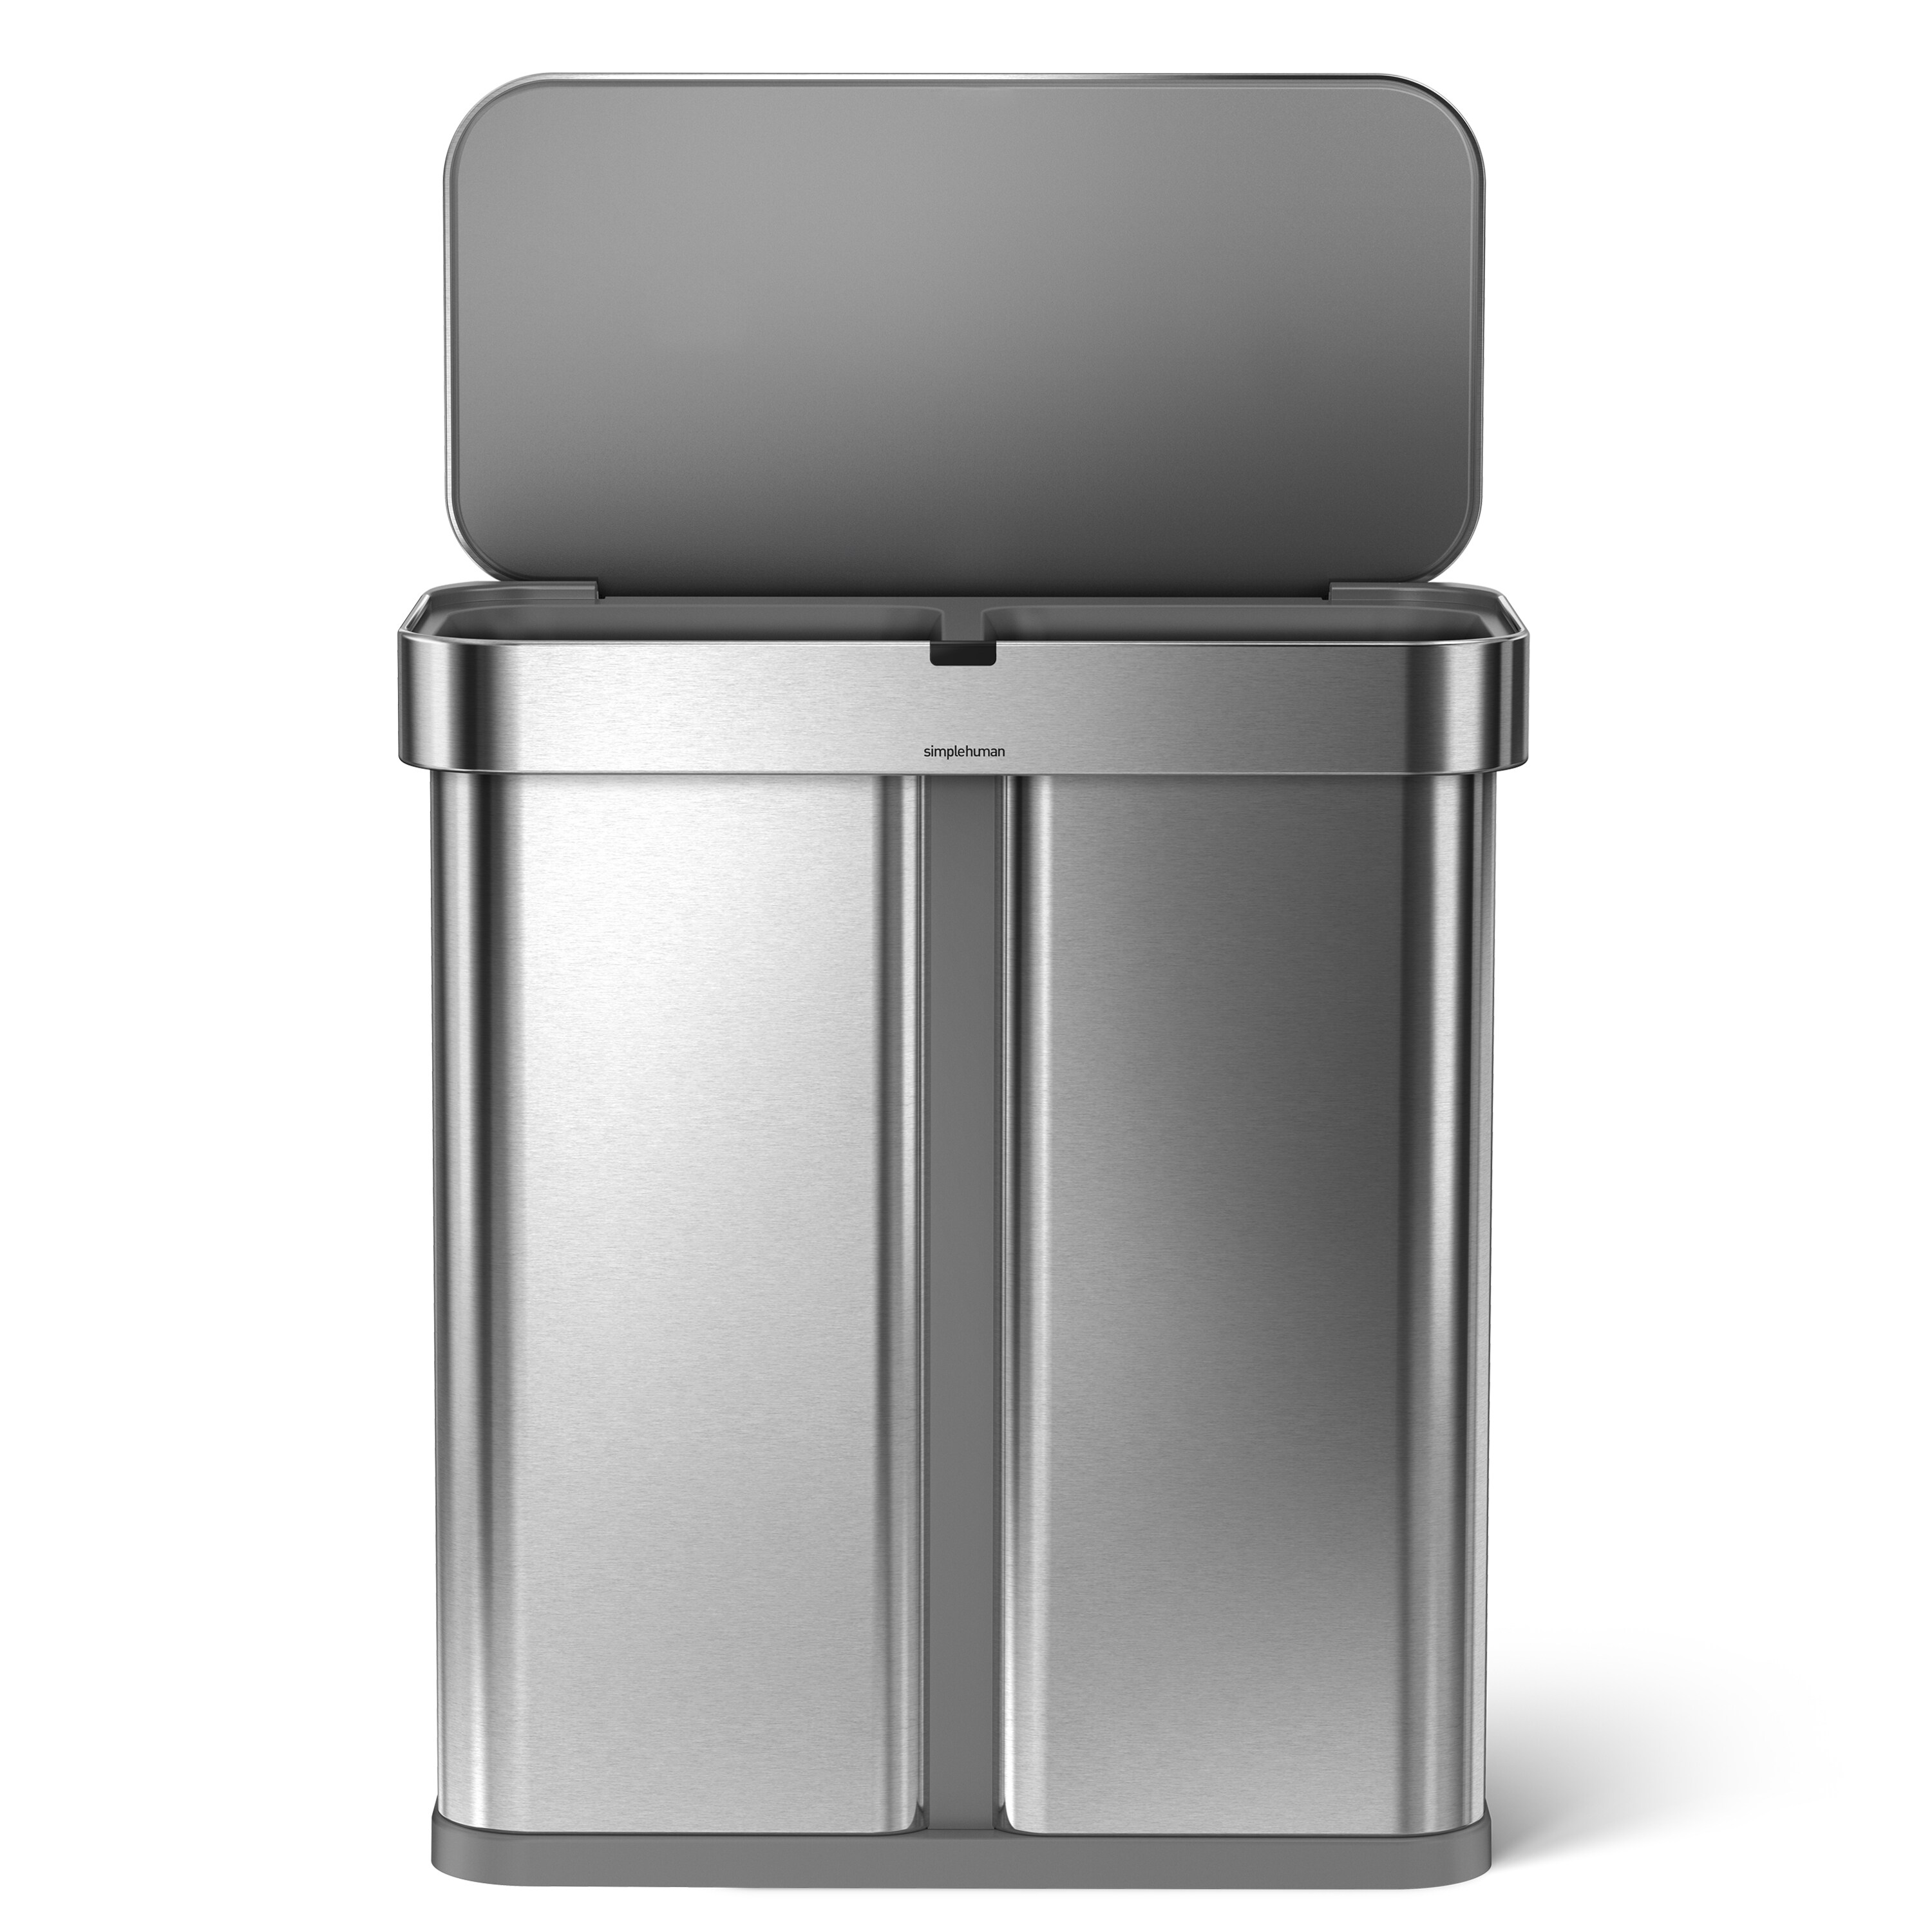 15.3 Gallon Touch-Free Dual Compartment Rectangular Kitchen Trash Can Recycler Voice and Motion Sensor Activated White Stainless Steel simplehuman 58 Liter